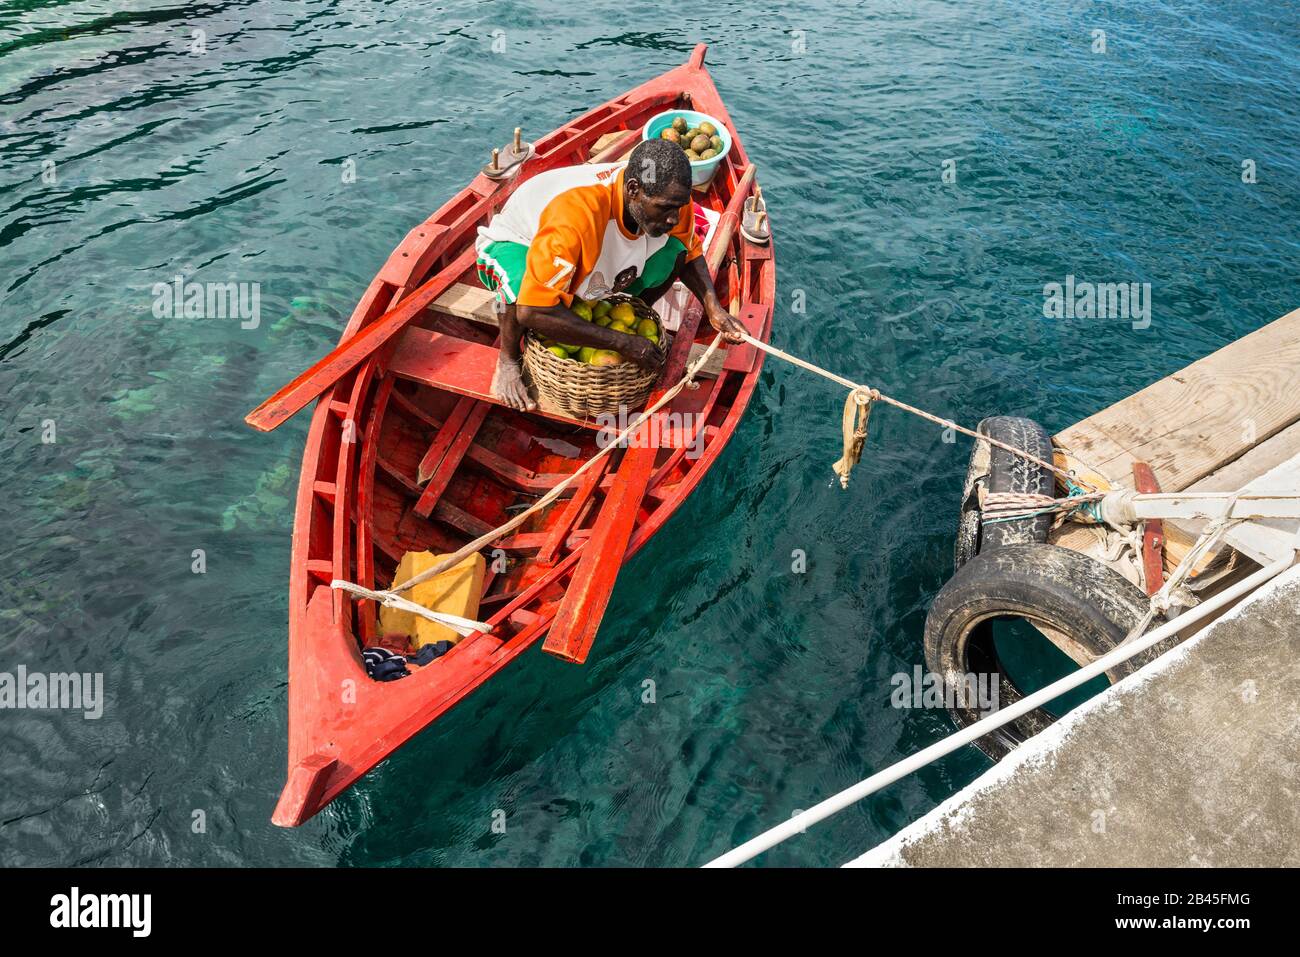 Wallilabou Bay, Saint Vincent and the Grenadines - December 19, 2018: Fruit merchant in a wooden boat brought fruit to the Wallilabou Anchorage - Pira Stock Photo